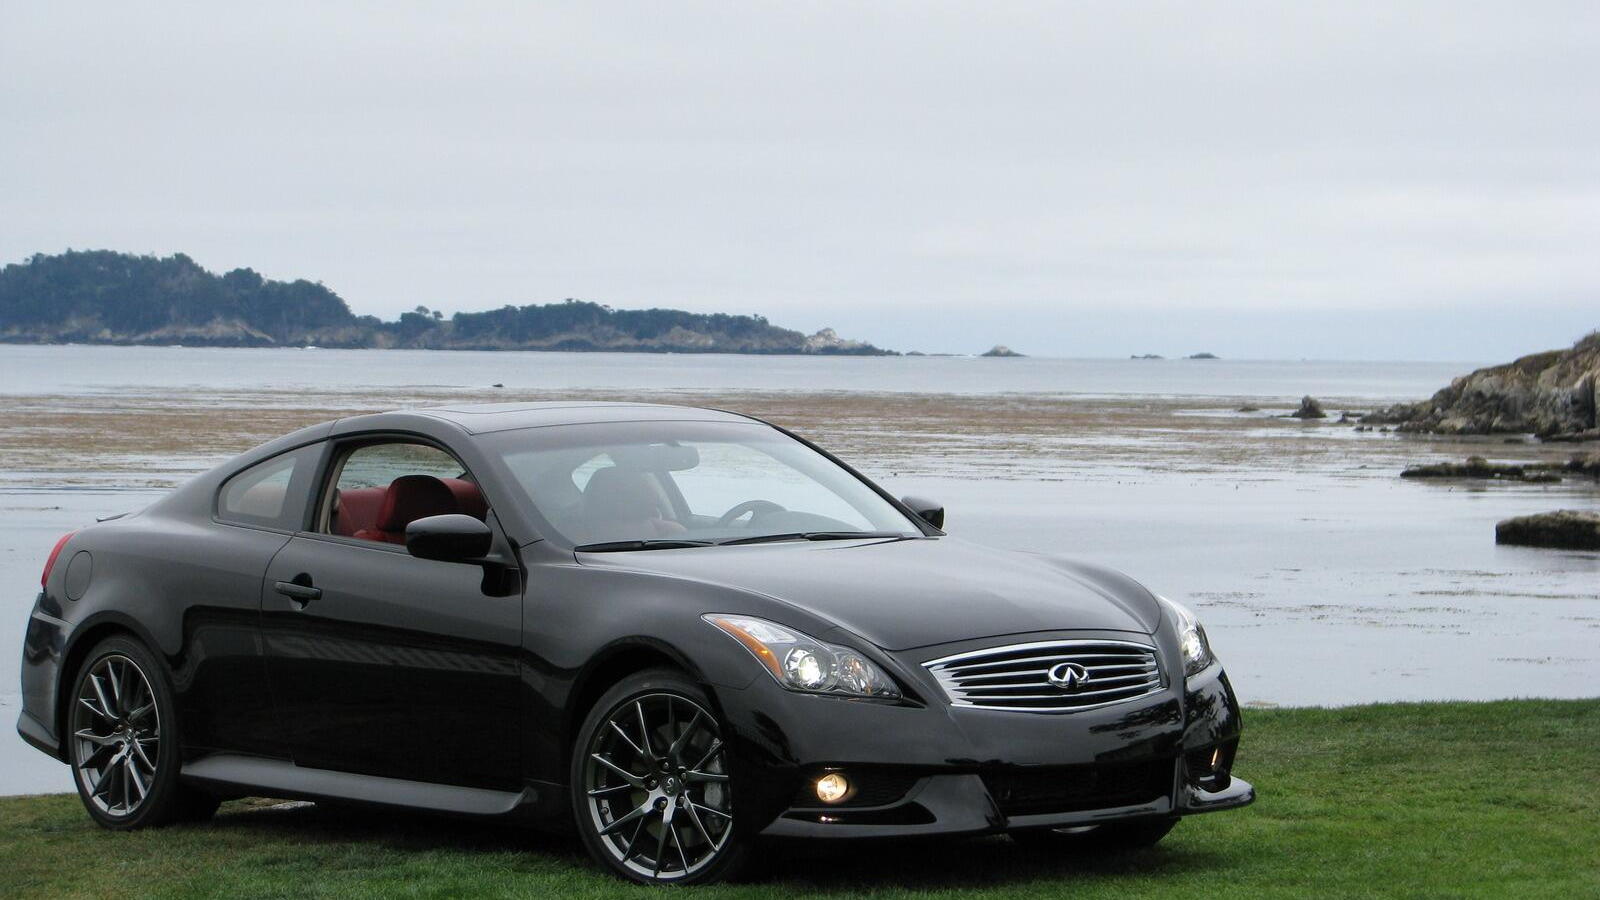 2011 Infiniti G37 Coupe IPL live from Pebble Beach